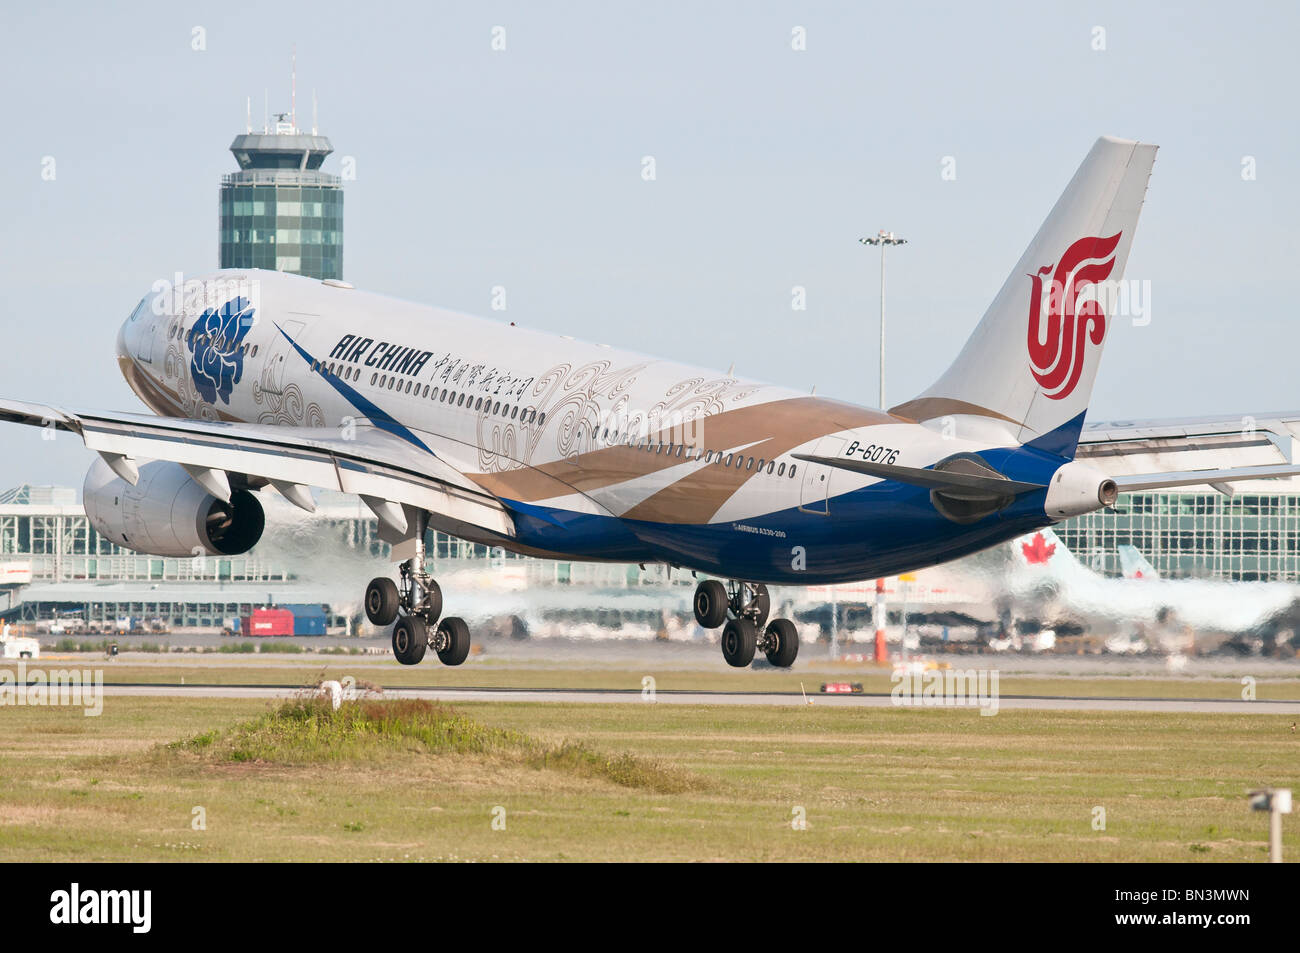 Ein Air China Airbus A330-200 Landung in Vancouver International Airport (YVR). Stockfoto